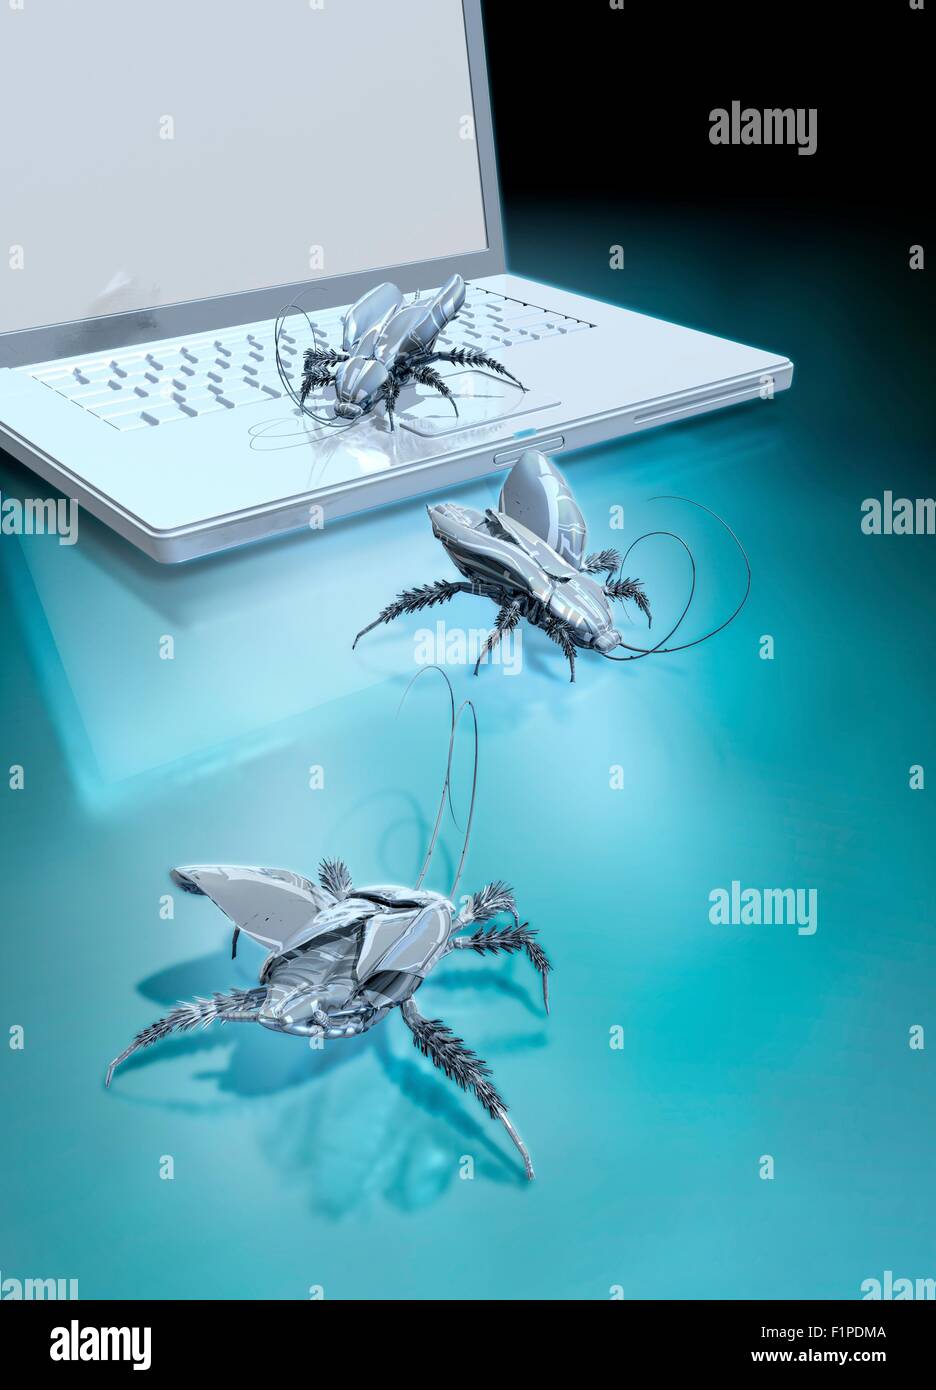 Robotic bugs and a laptop, computer illustration. Stock Photo